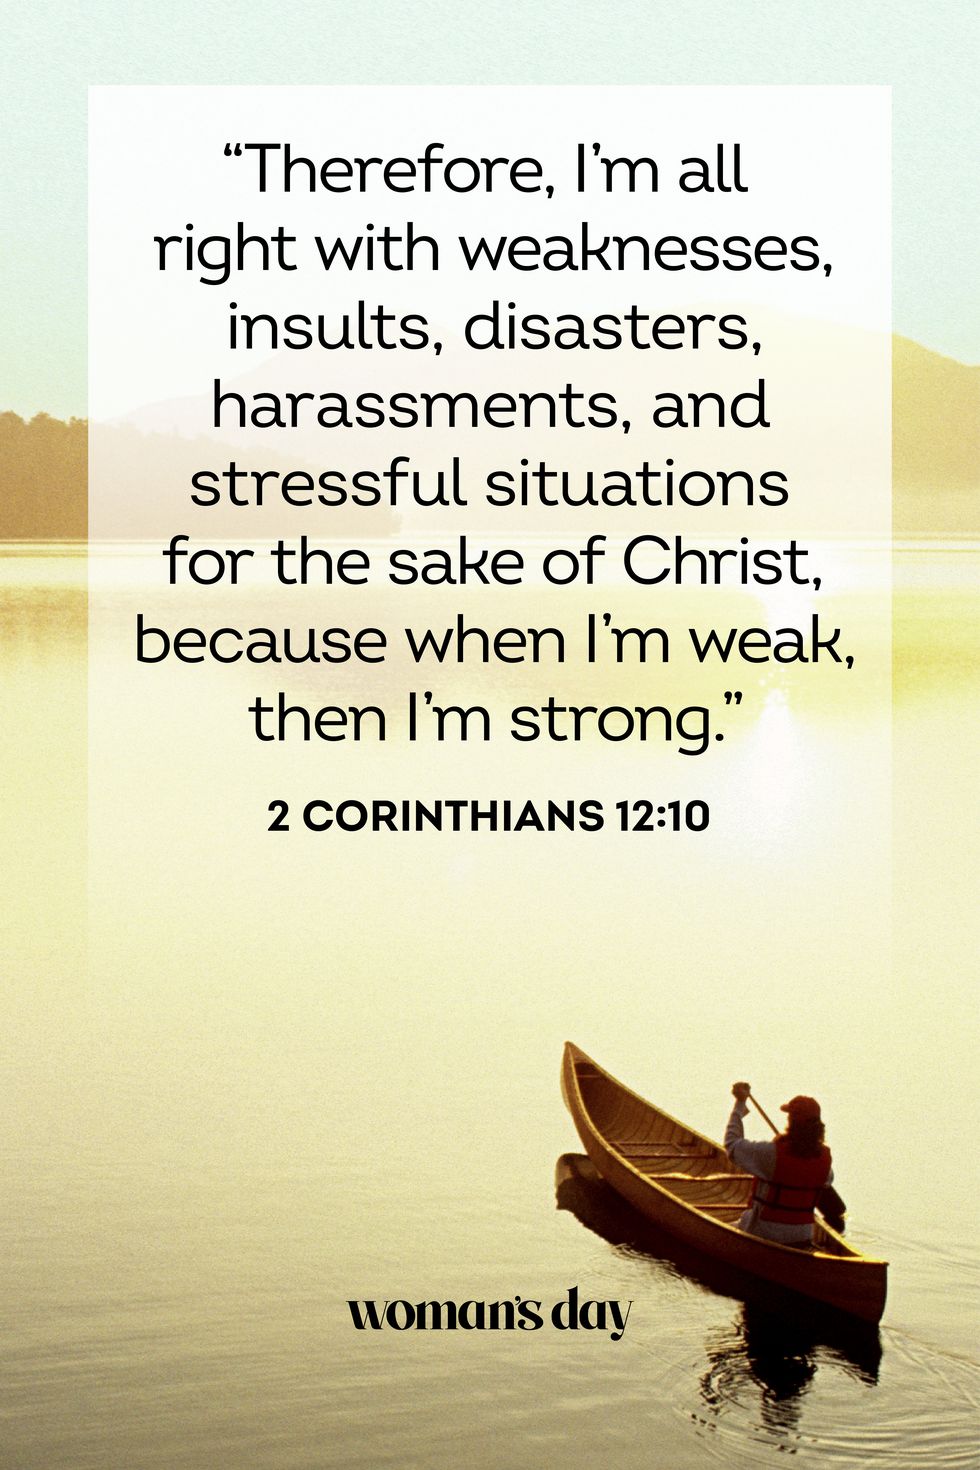 Bible Quotes On Strength - Bible Verses About Strength